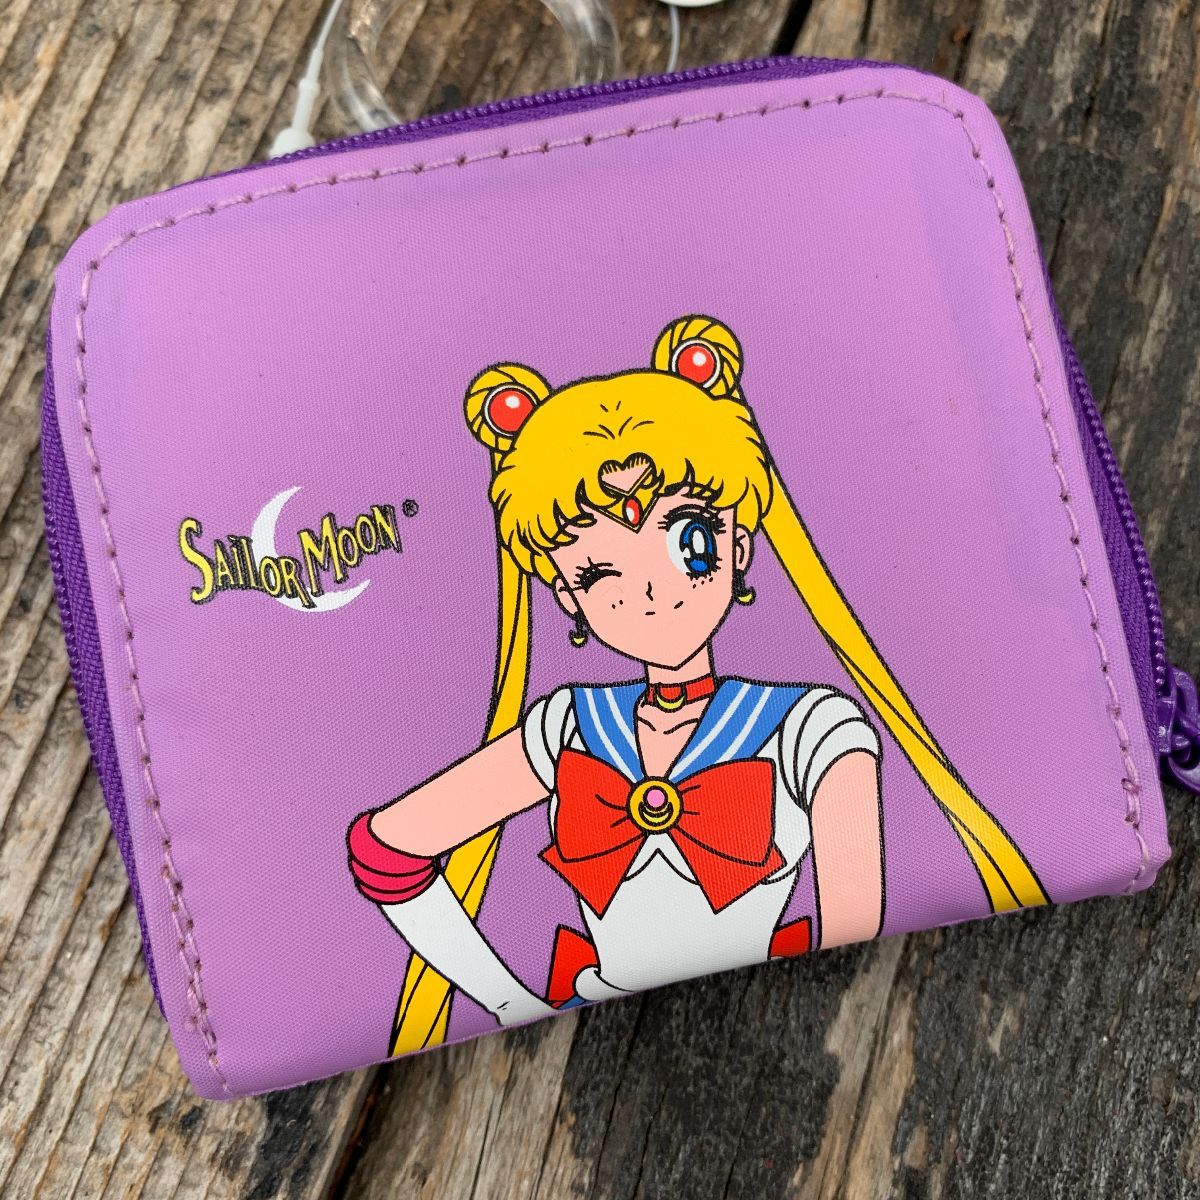 NEW  WITH TAGS   *SAILOR MOON*     FABRIC COIN PURSE  PURPLE   1999 